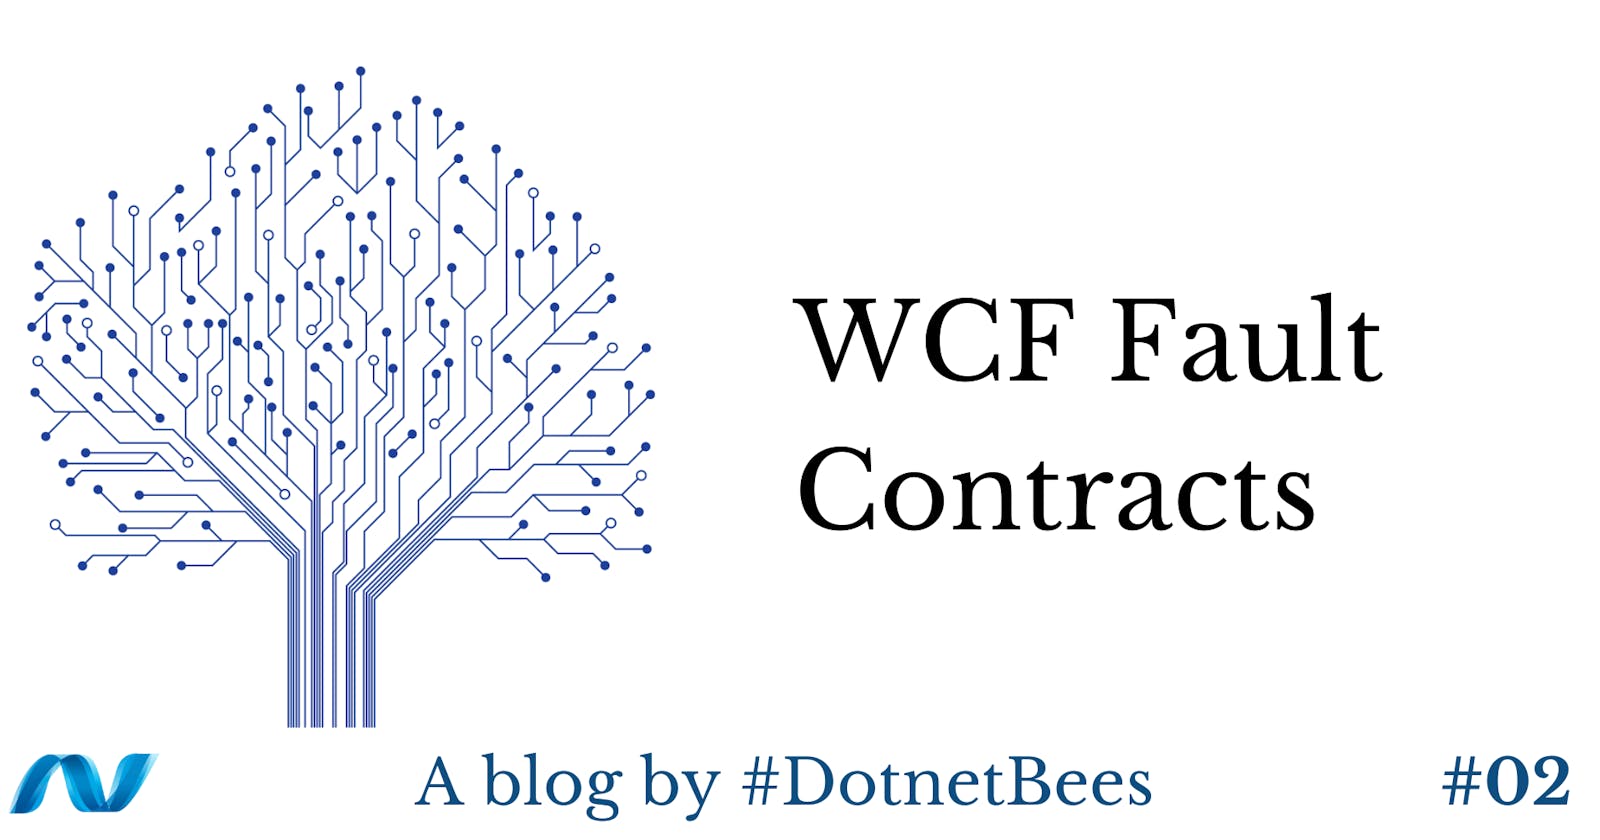 WCF Fault Contracts